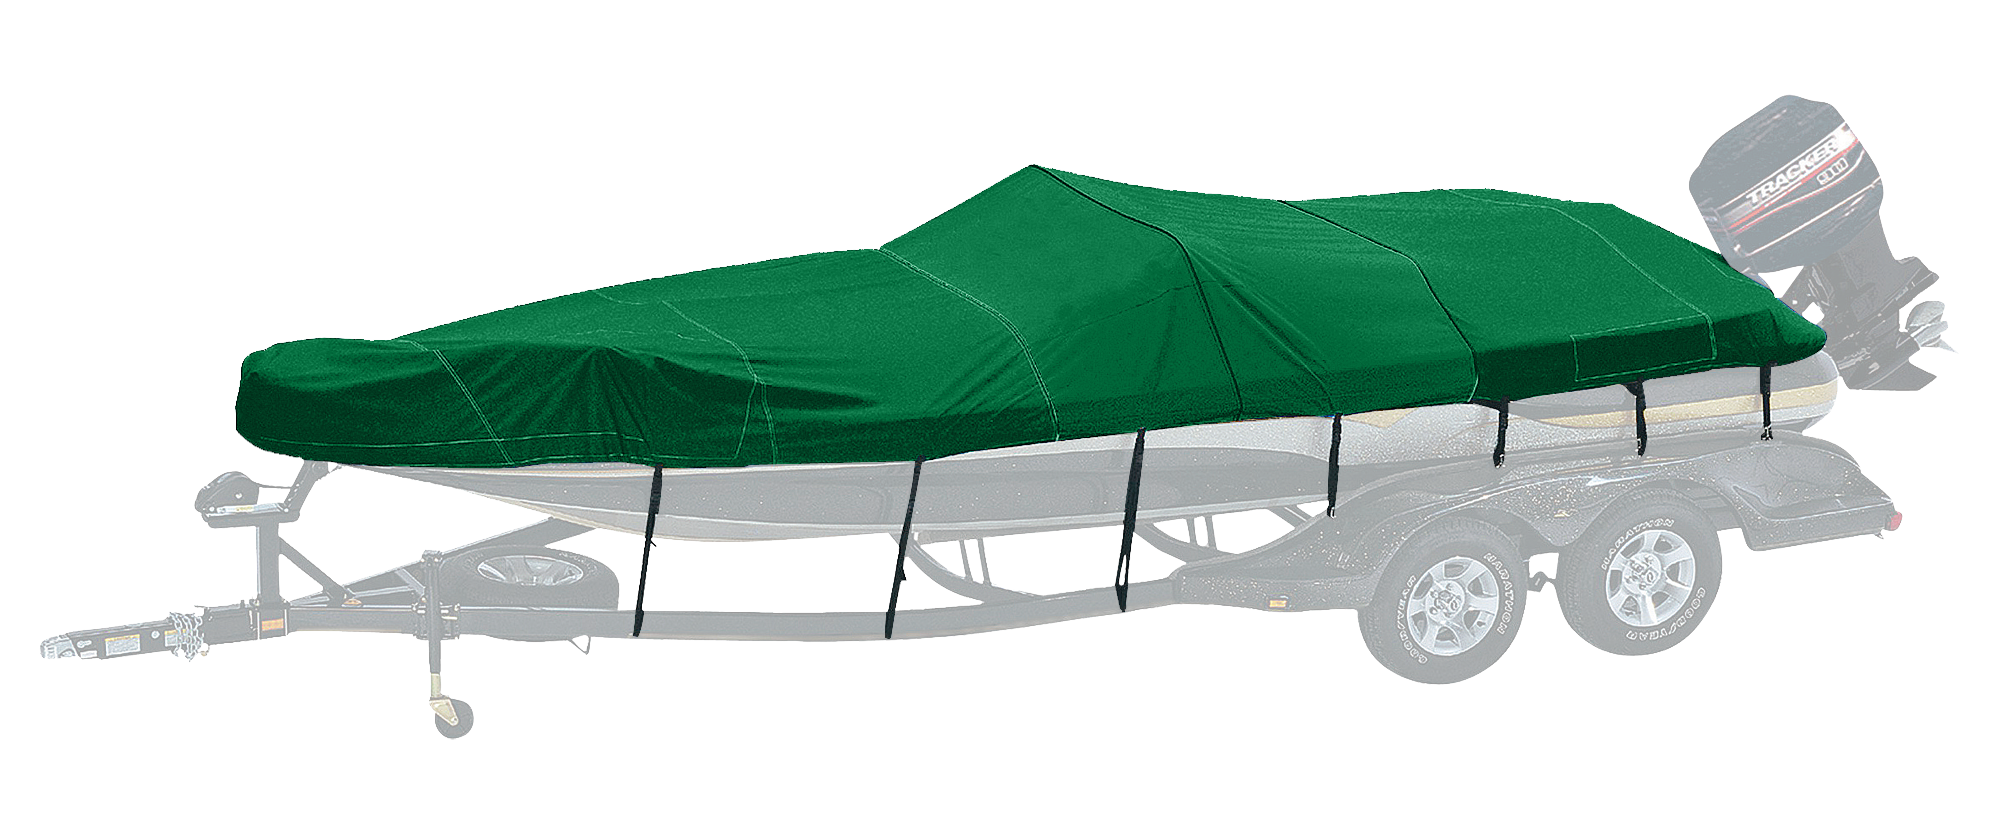 Bass Pro Shops Exact Fit Boat Cover by Westland - Tahoe Boats - 2005 204 Deckboat I/O - Forest Green